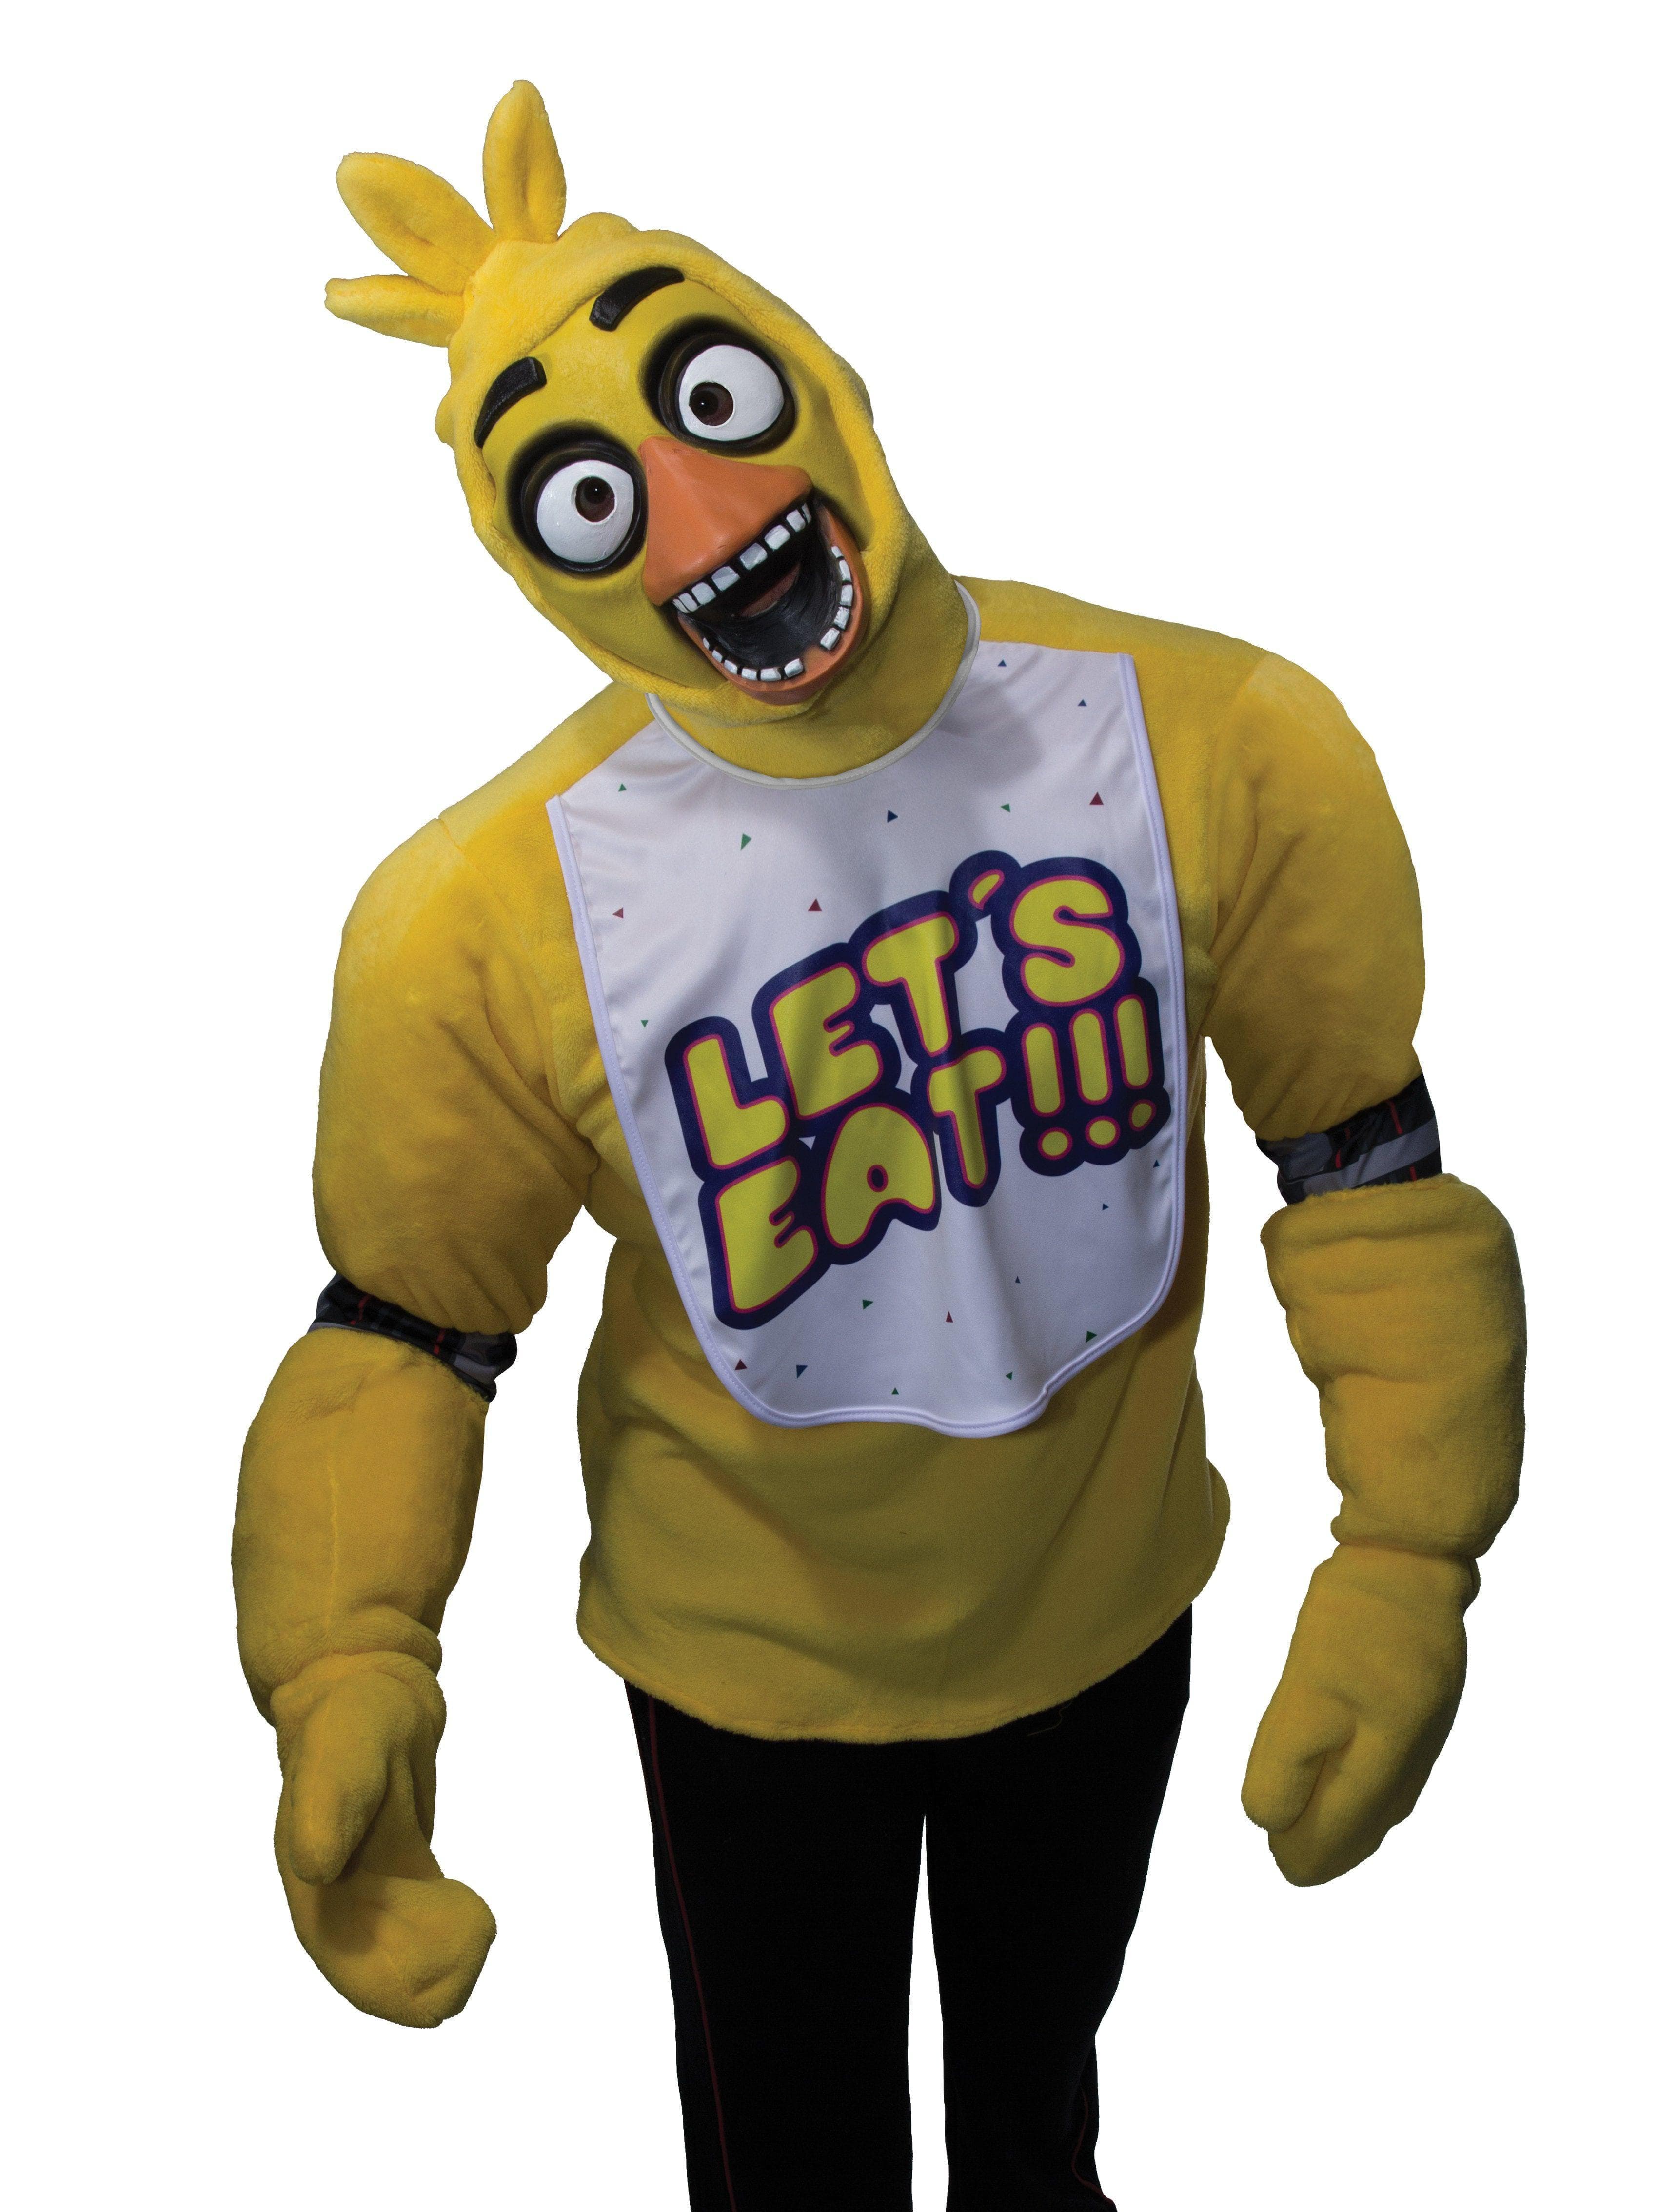 Kids Five Nights At Freddys Chica Costume - costumes.com